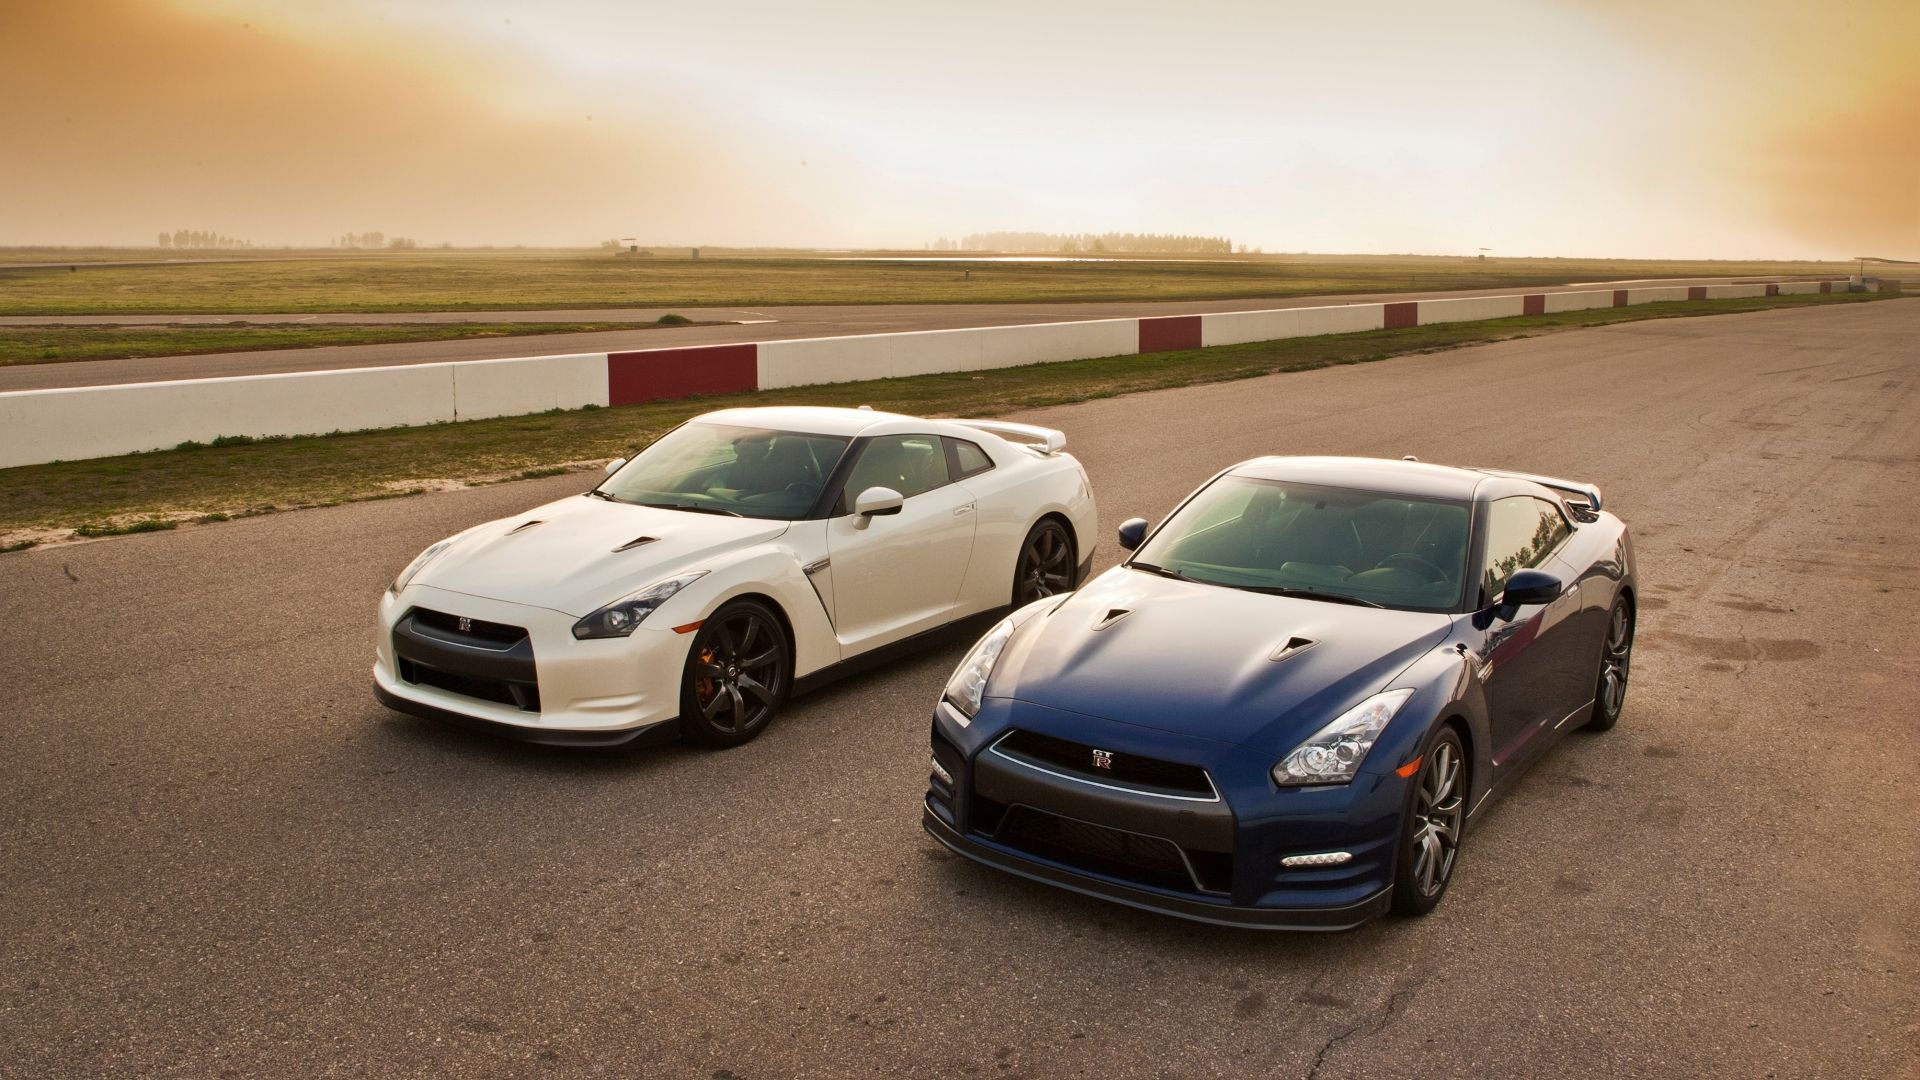 Two 2017 Nissan R35 GT-R Track Editions side by side